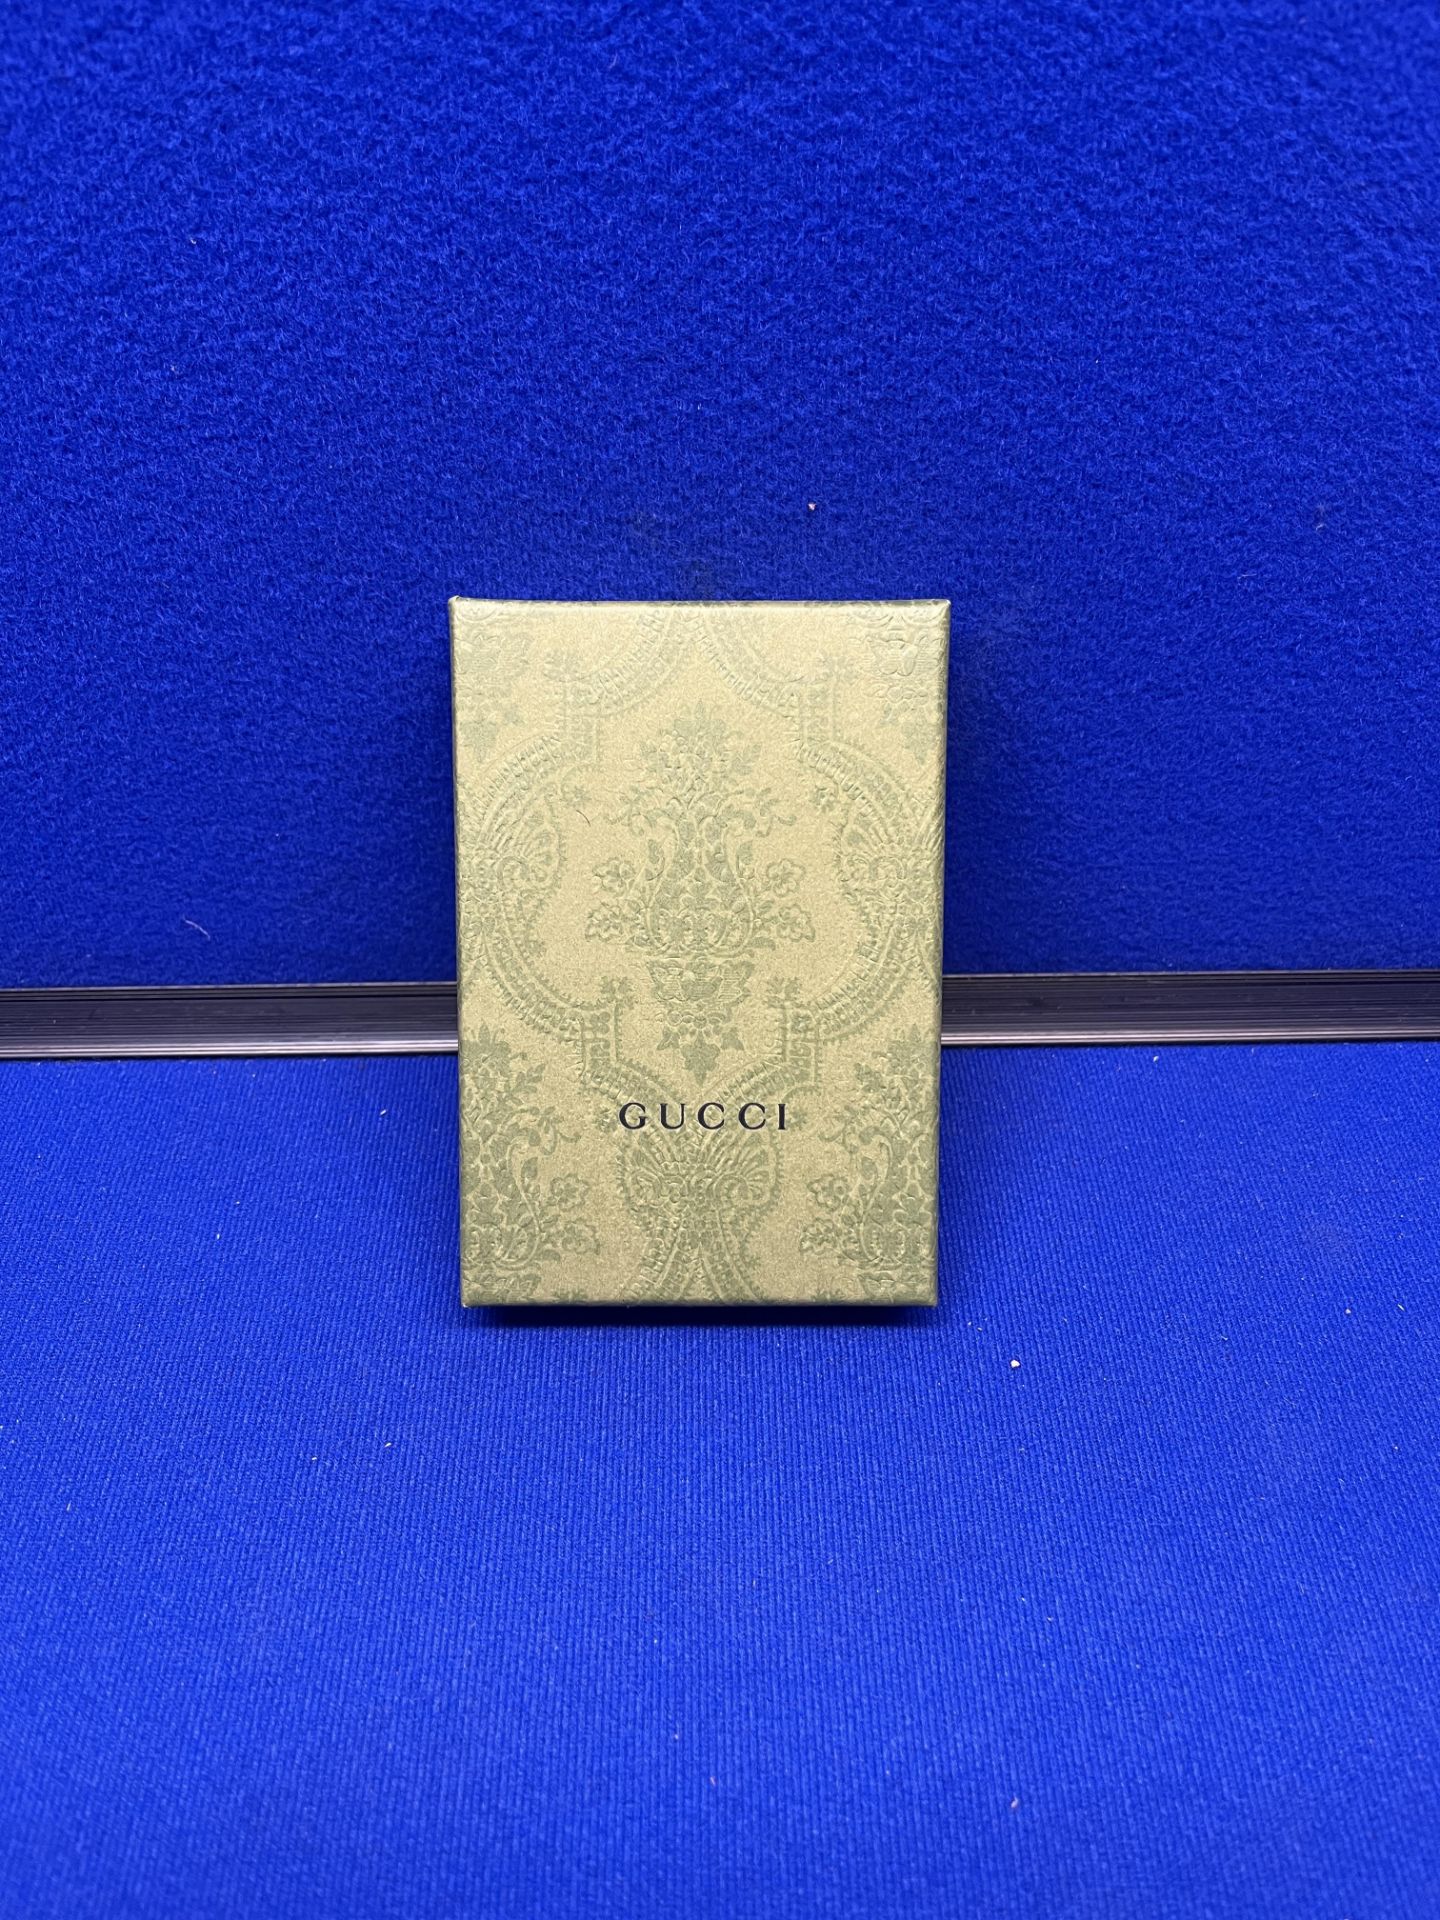 Gucci Double G Black Leather Card Holder - Image 3 of 4